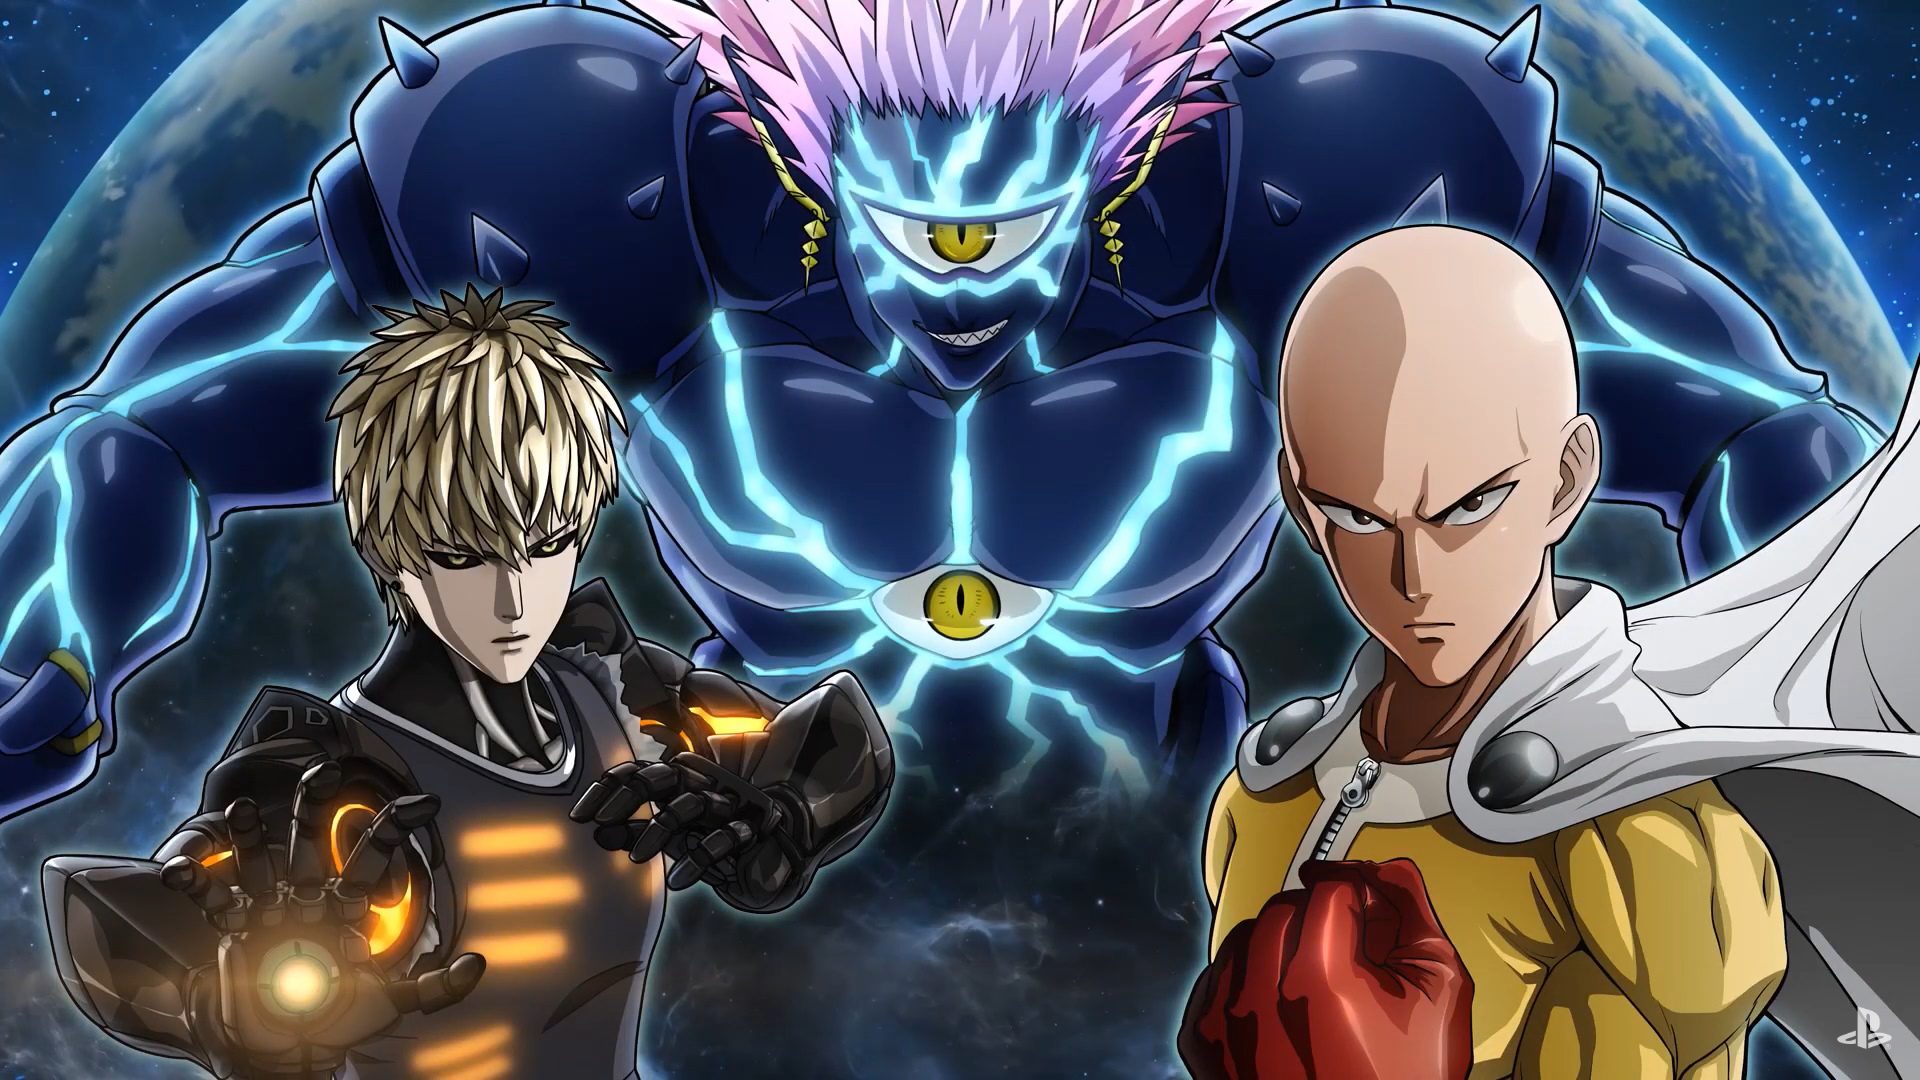 one punch man band 11